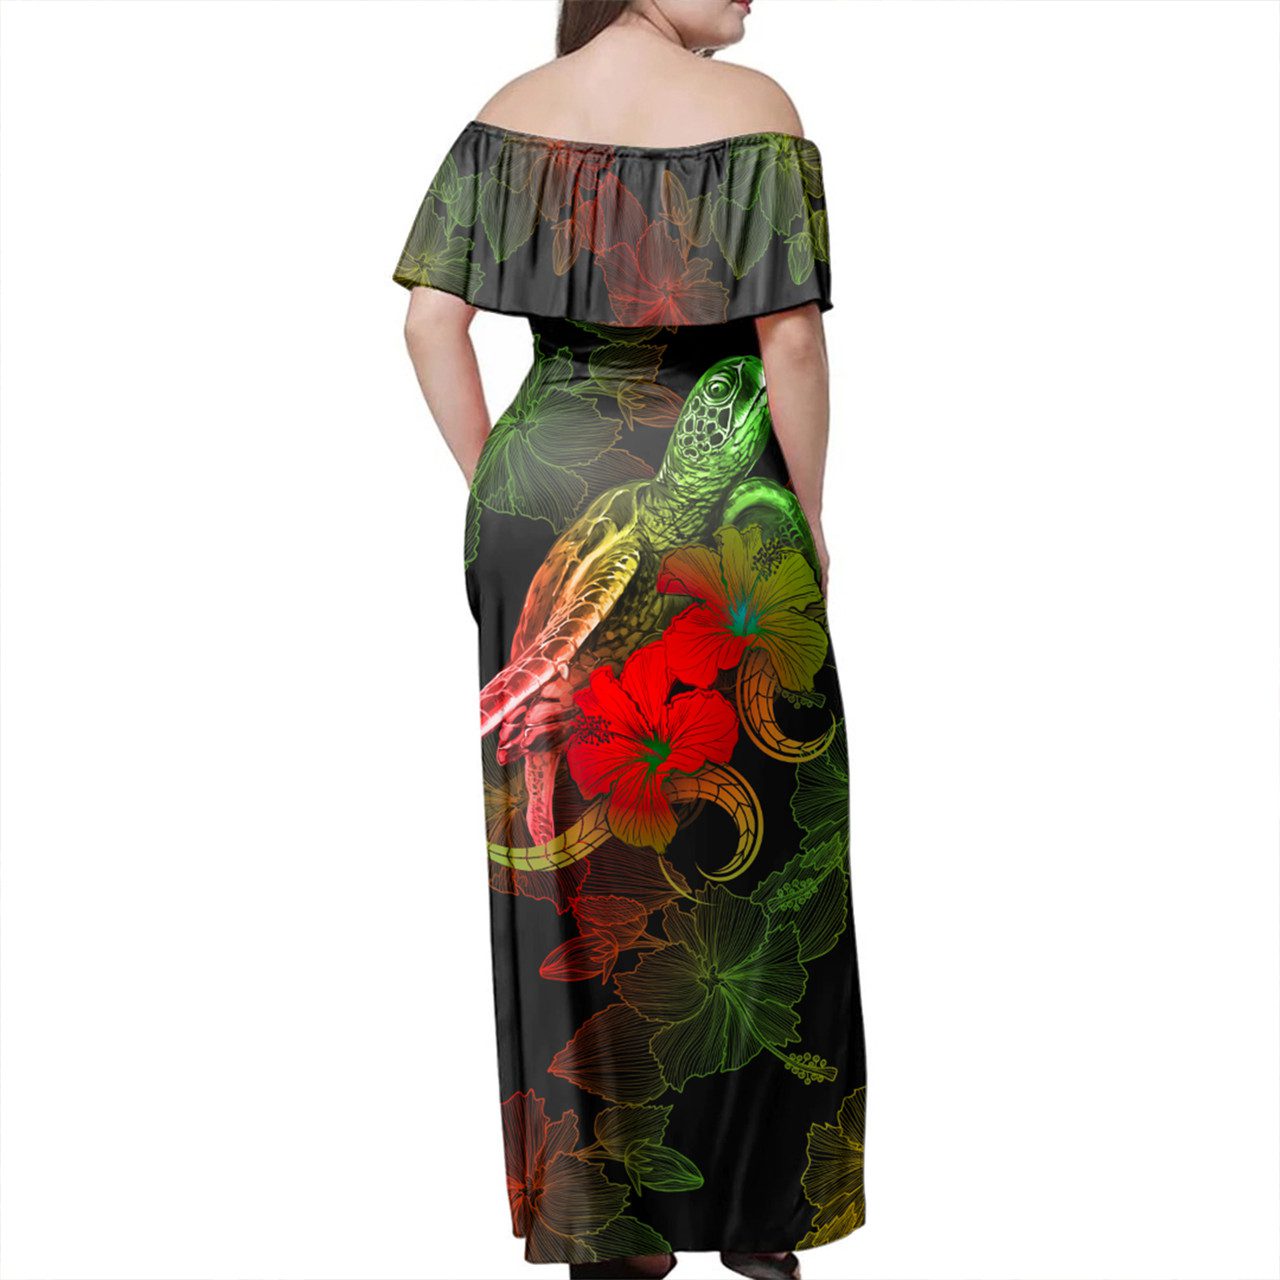 Chuuk State Woman Off Shoulder Long Dress – Sea Turtle With Blooming Hibiscus Flowers Reggae